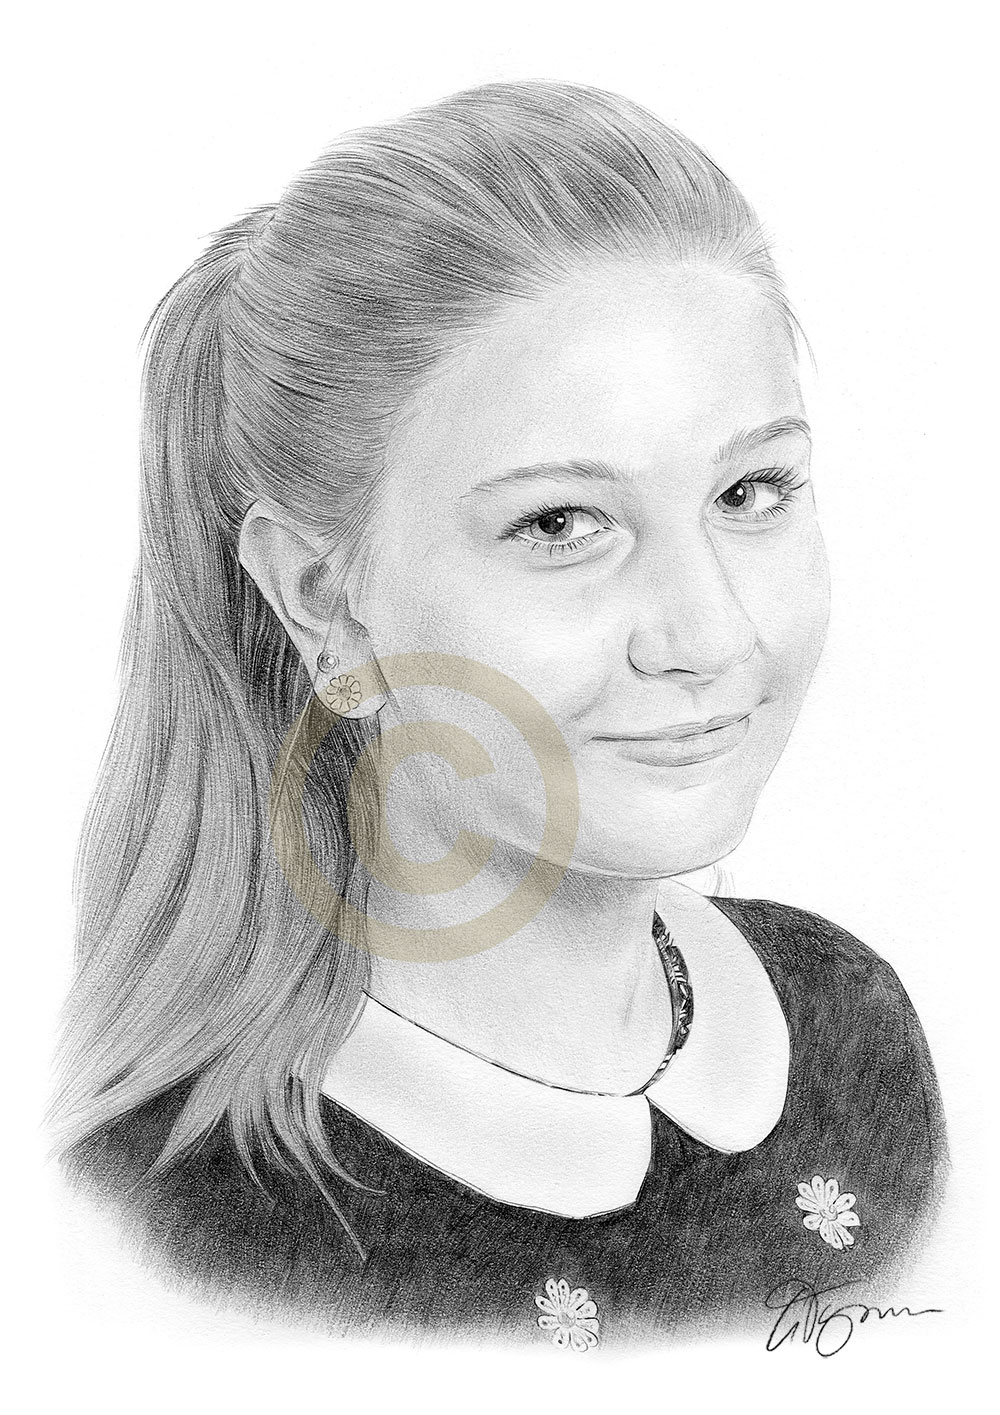 Pencil drawing commission of a girl by artist Gary Tymon